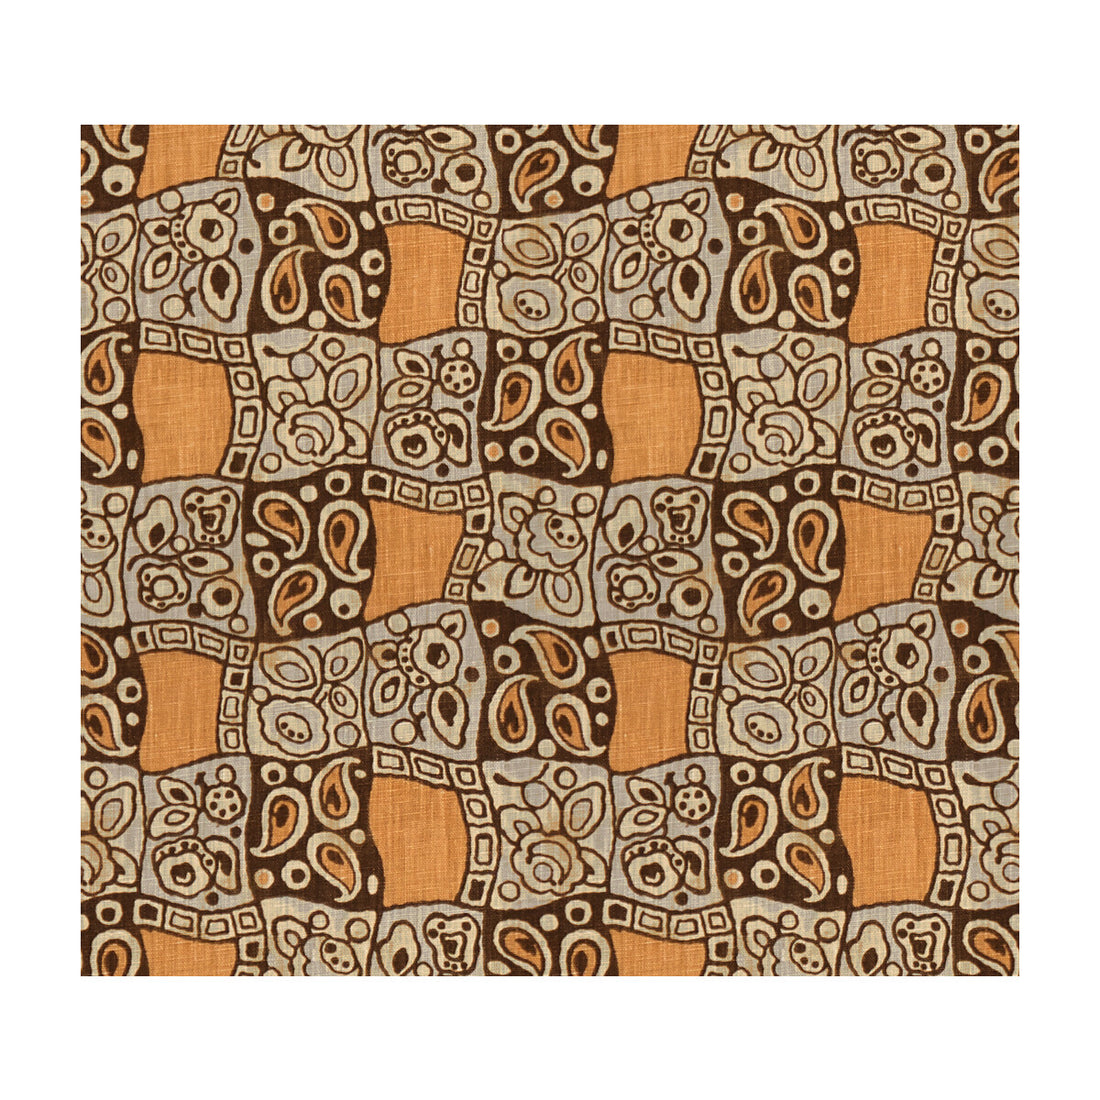 Margaret fabric in whiskey/brown color - pattern 2015110.684.0 - by Lee Jofa in the Bunny Williams collection